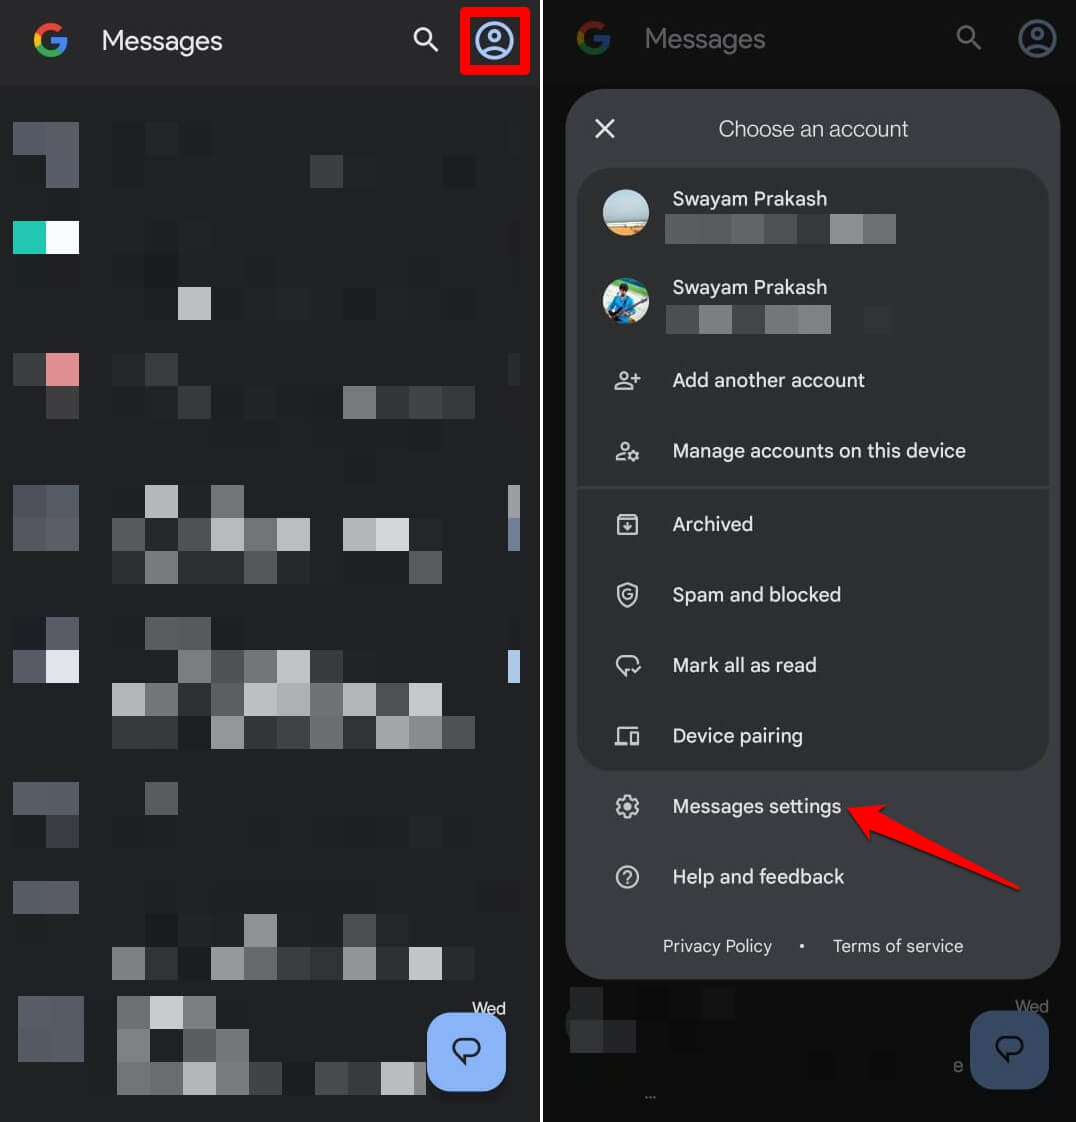 messages app settings on Android OS